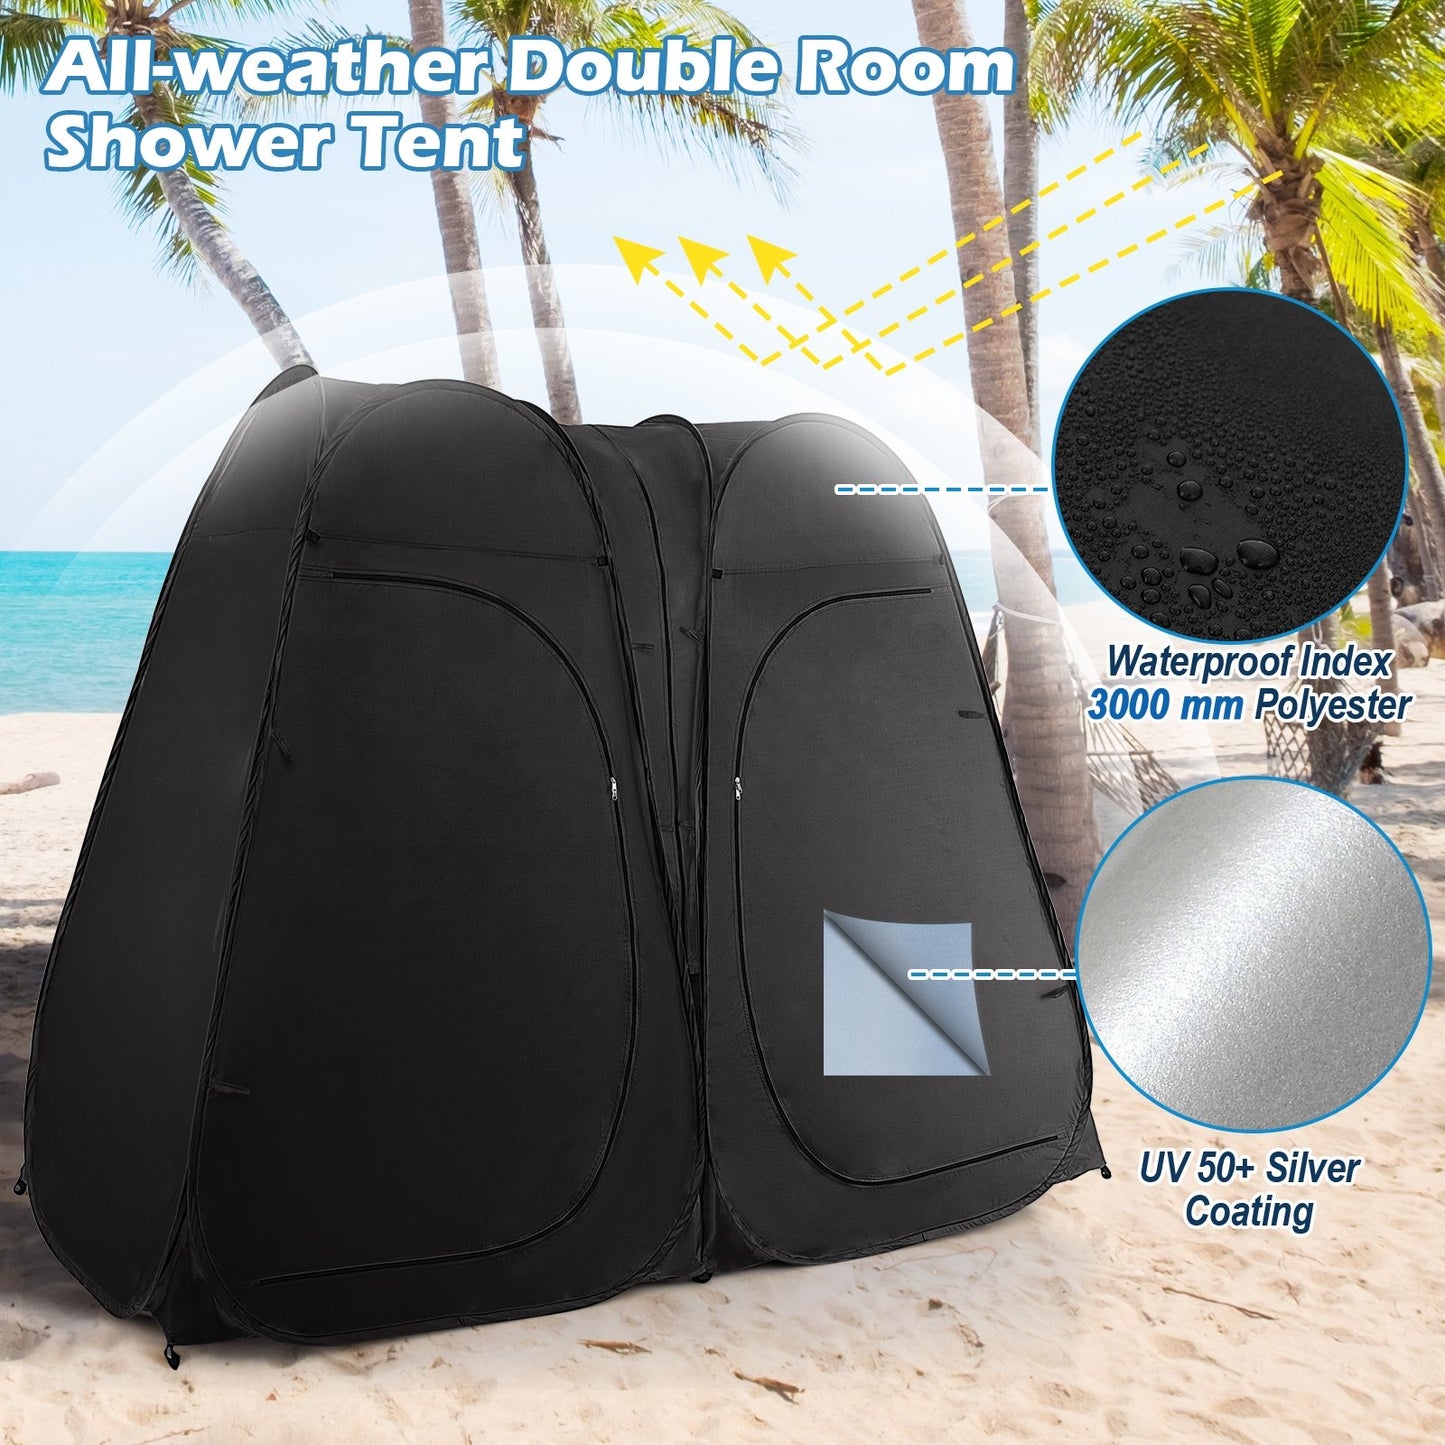 Oversized Pop Up Shower Tent with Window Floor and Storage Pocket, Black - Gallery Canada